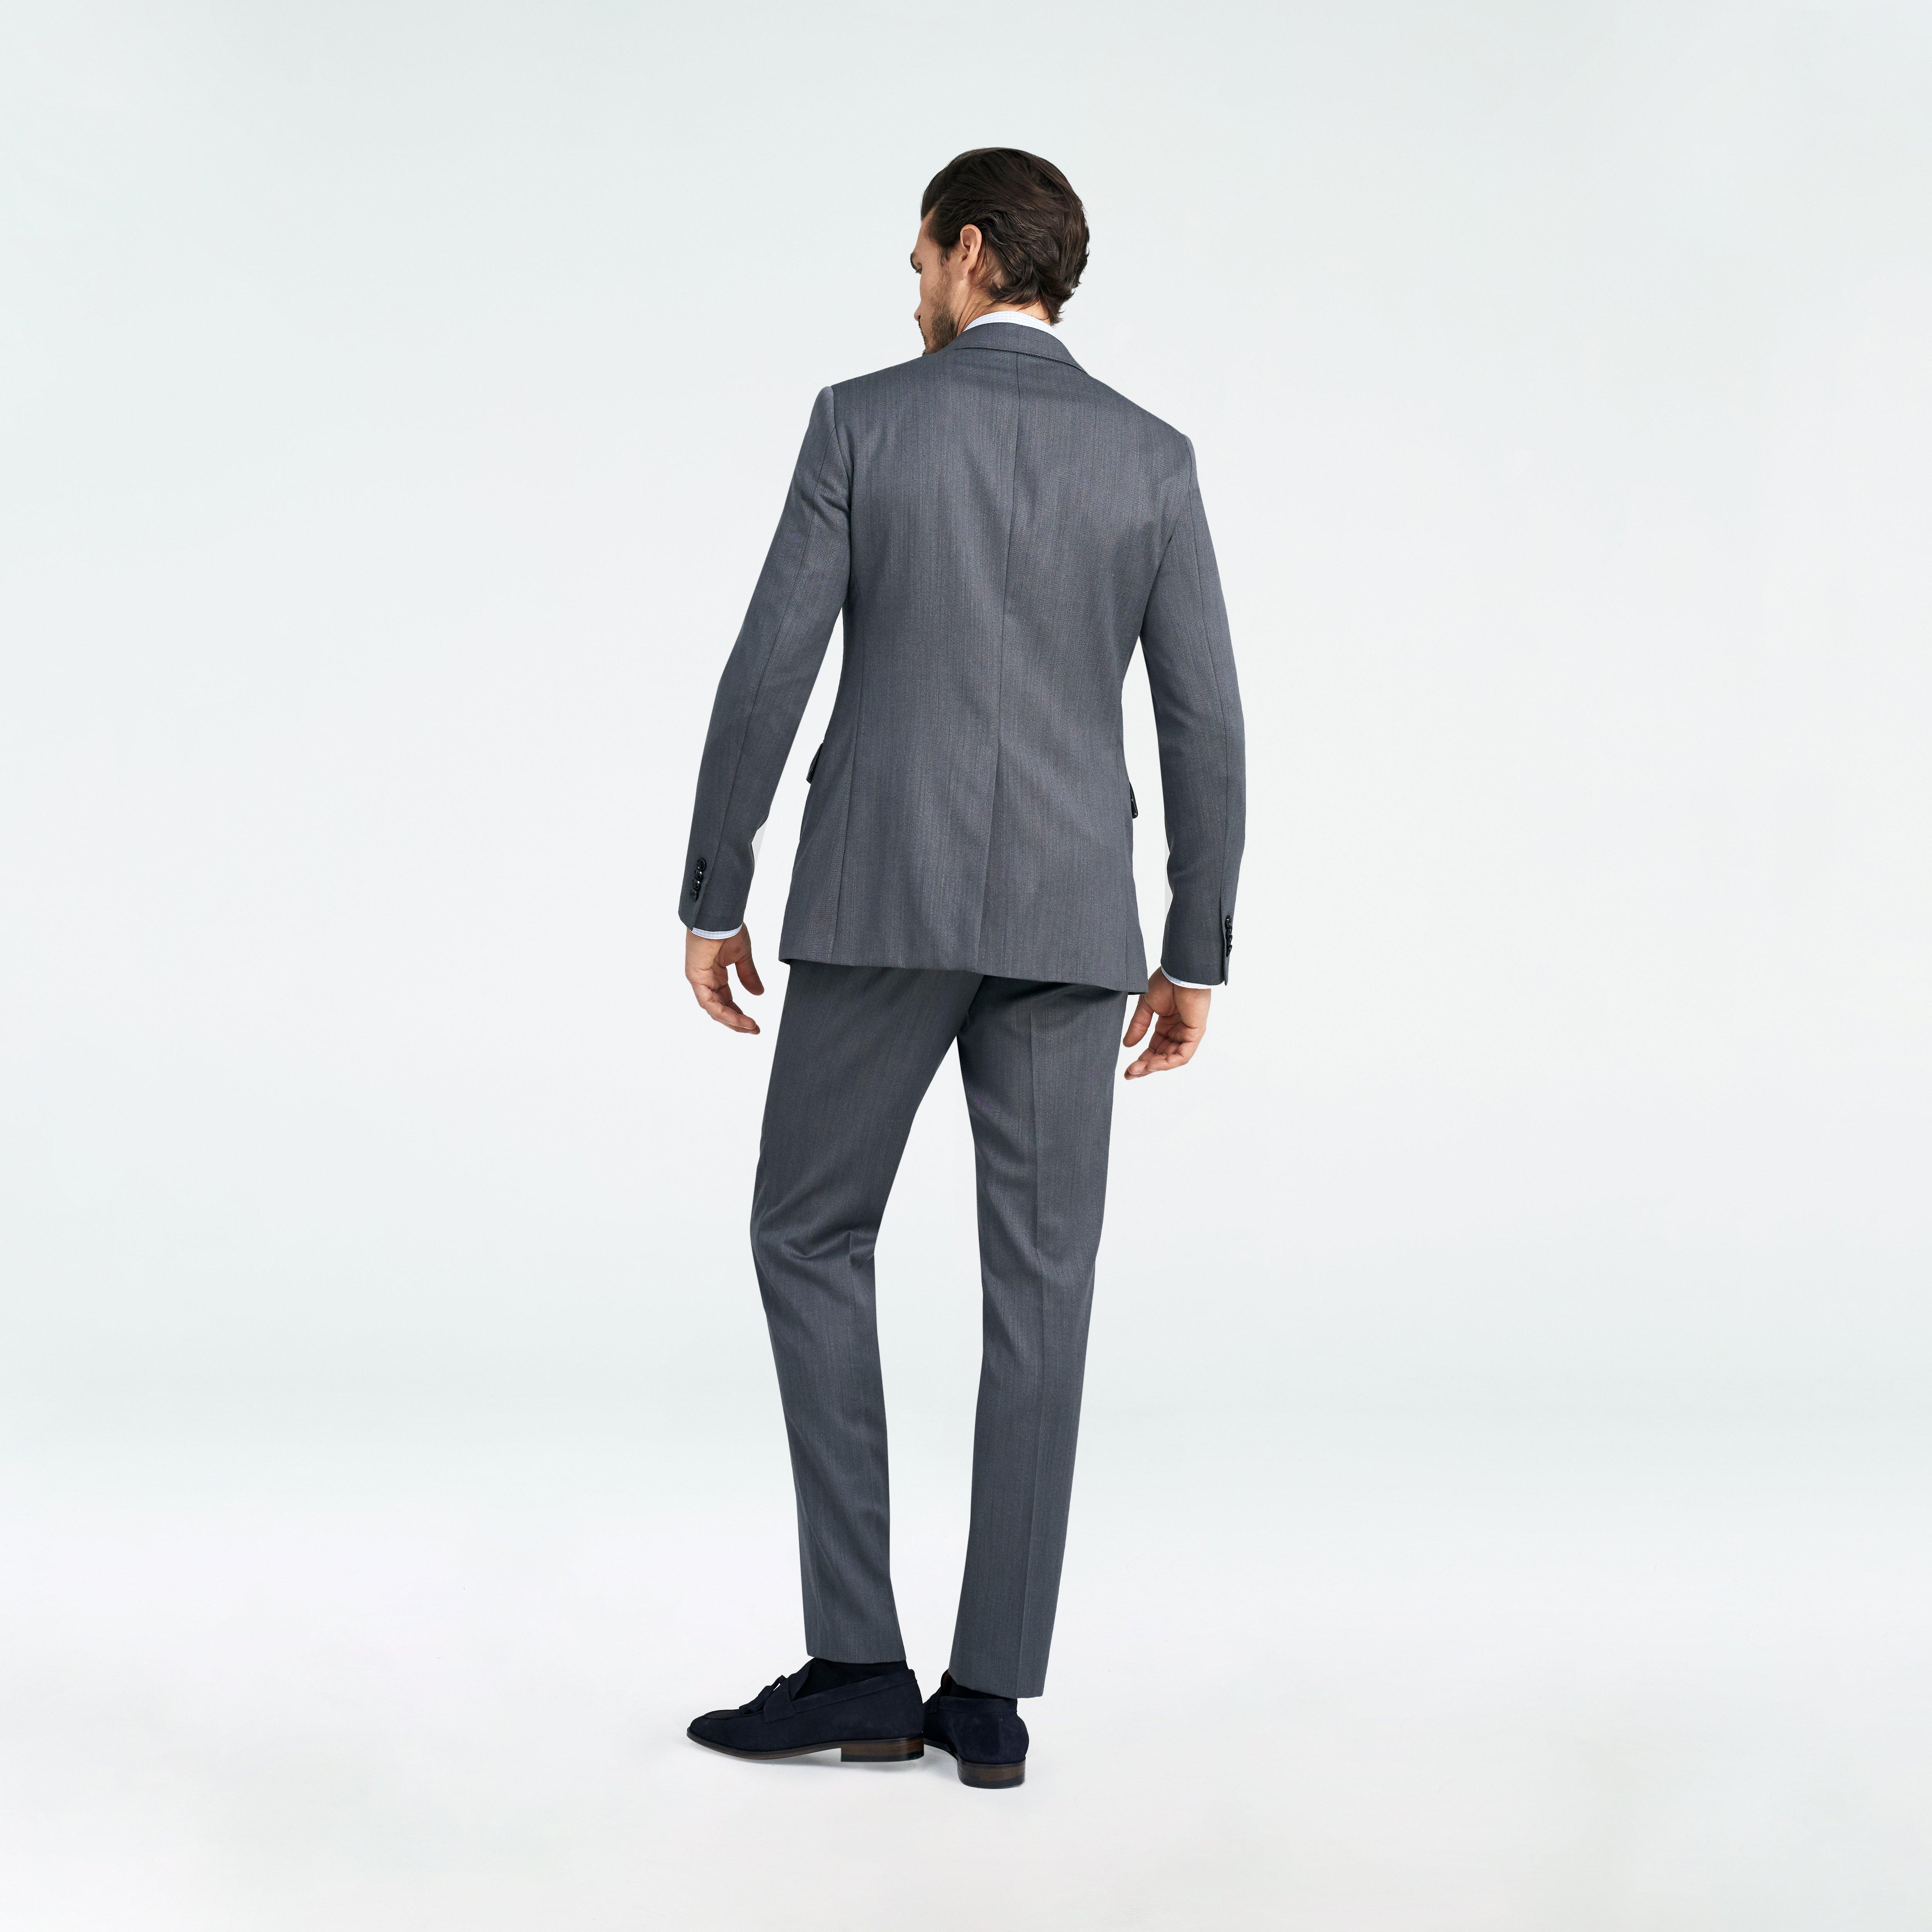 Custom Suits Made For You - Hereford Cavalry Twill Gray Suit | INDOCHINO